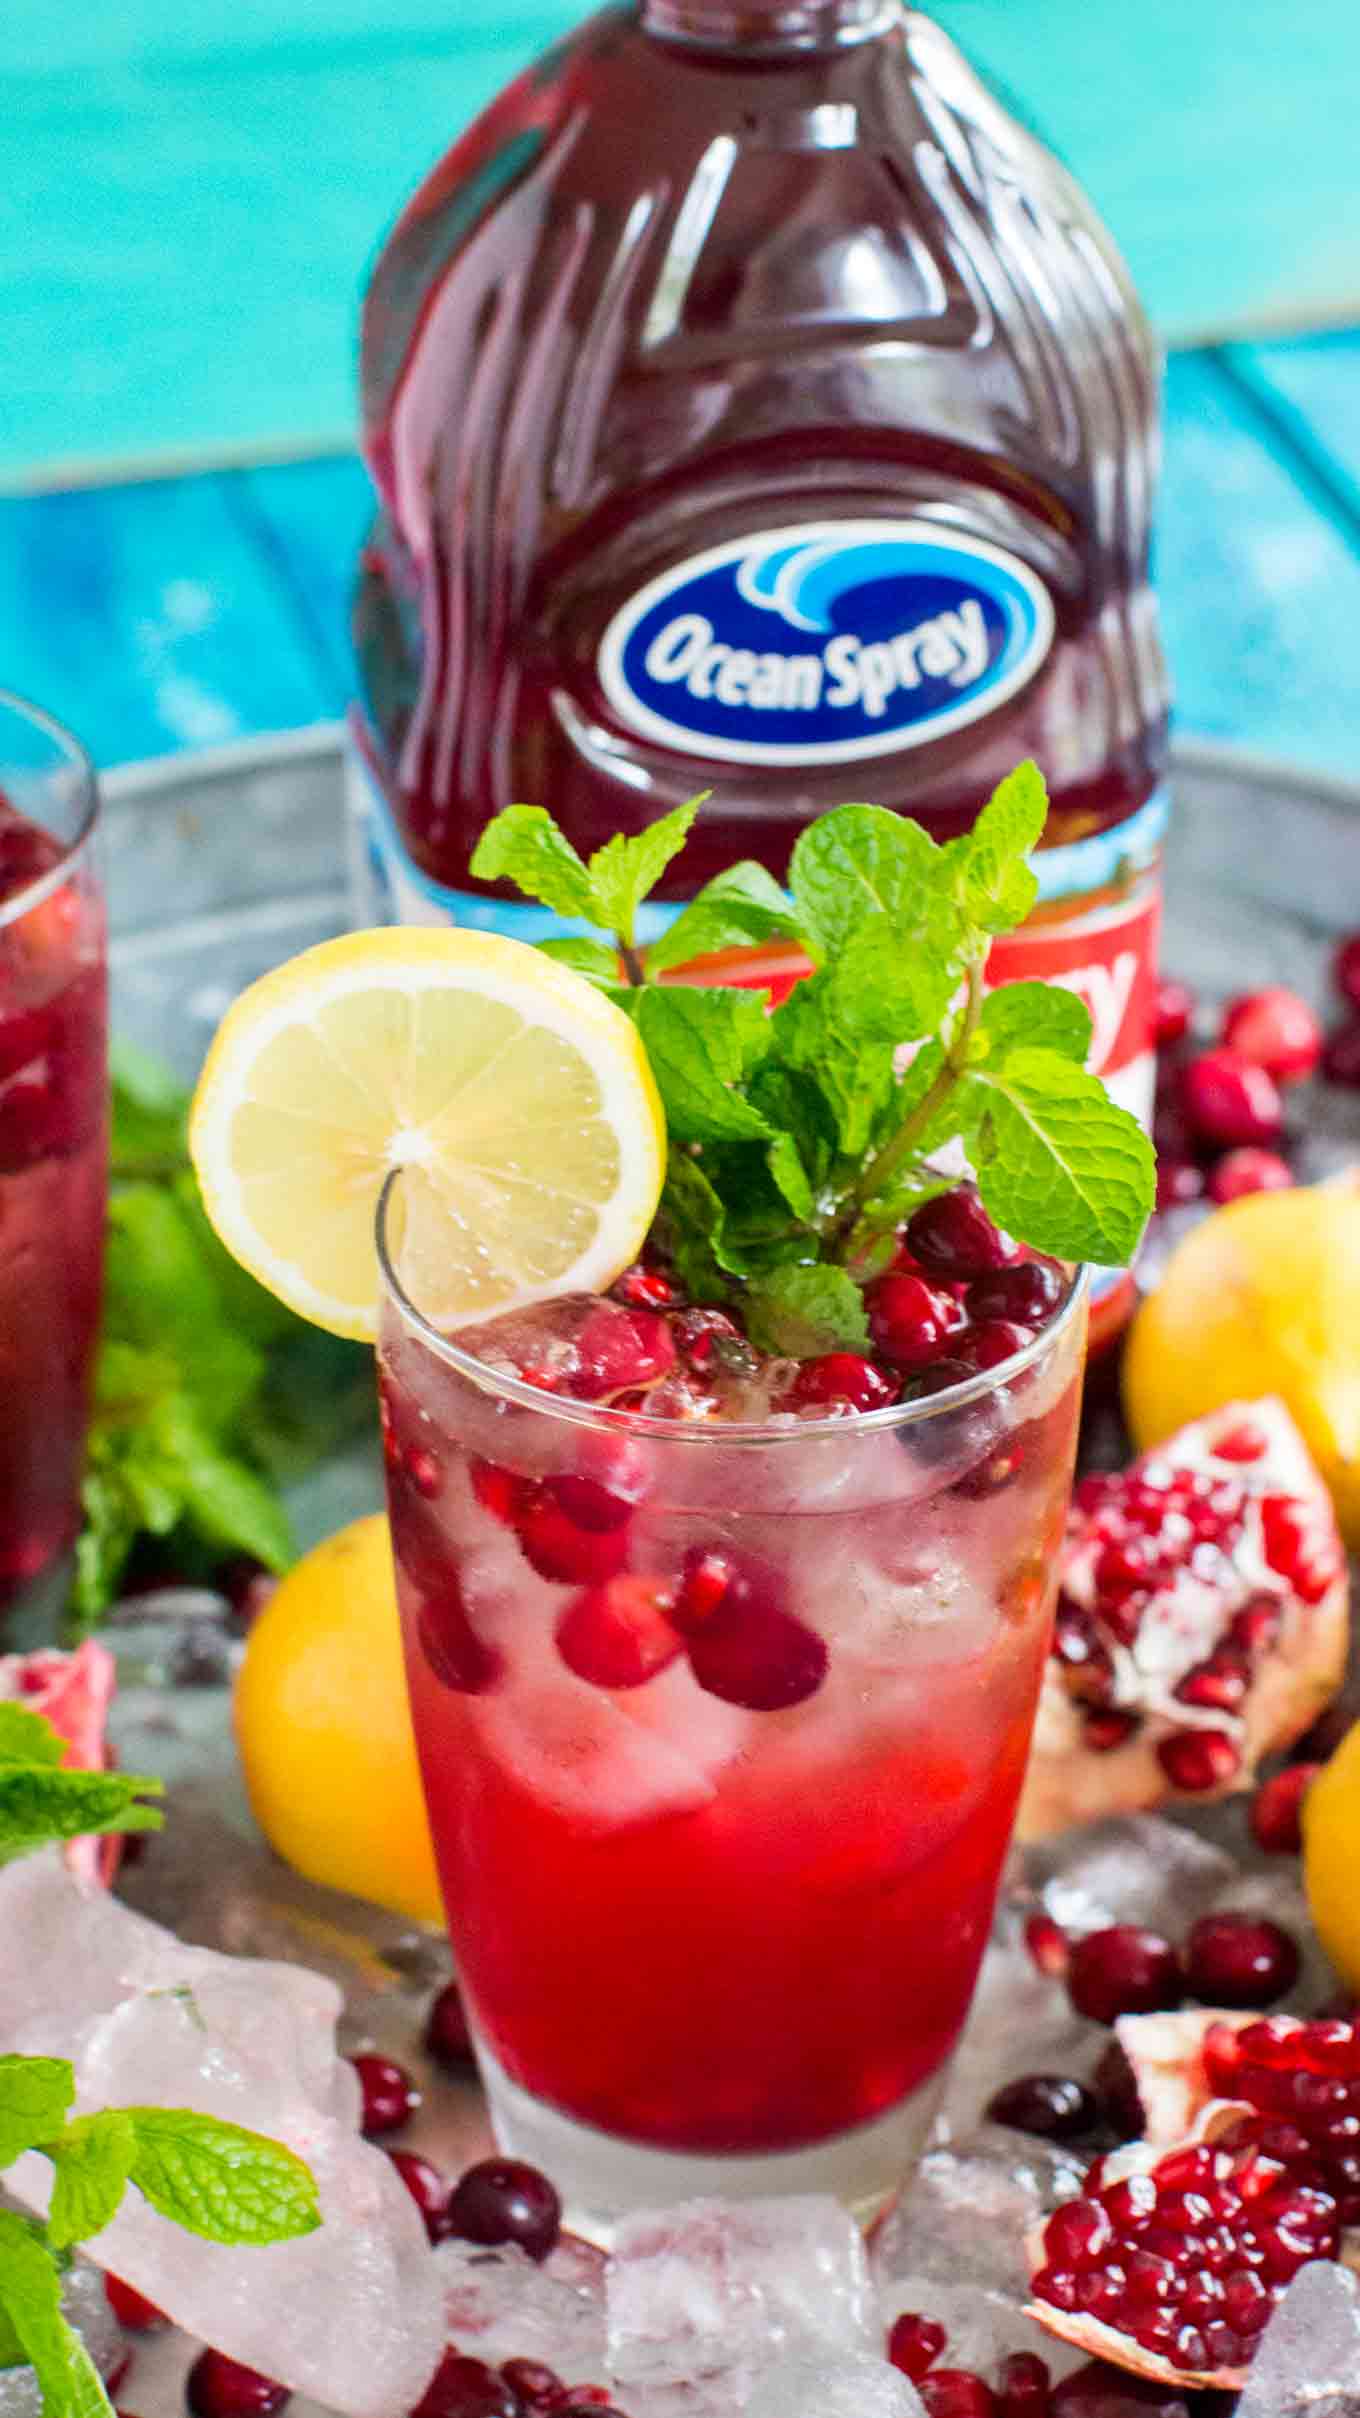 Best Cranberry Mocktail is the perfect fall drink, sweet and refreshing, can also be made ahead of time for your Thanksgiving feast.